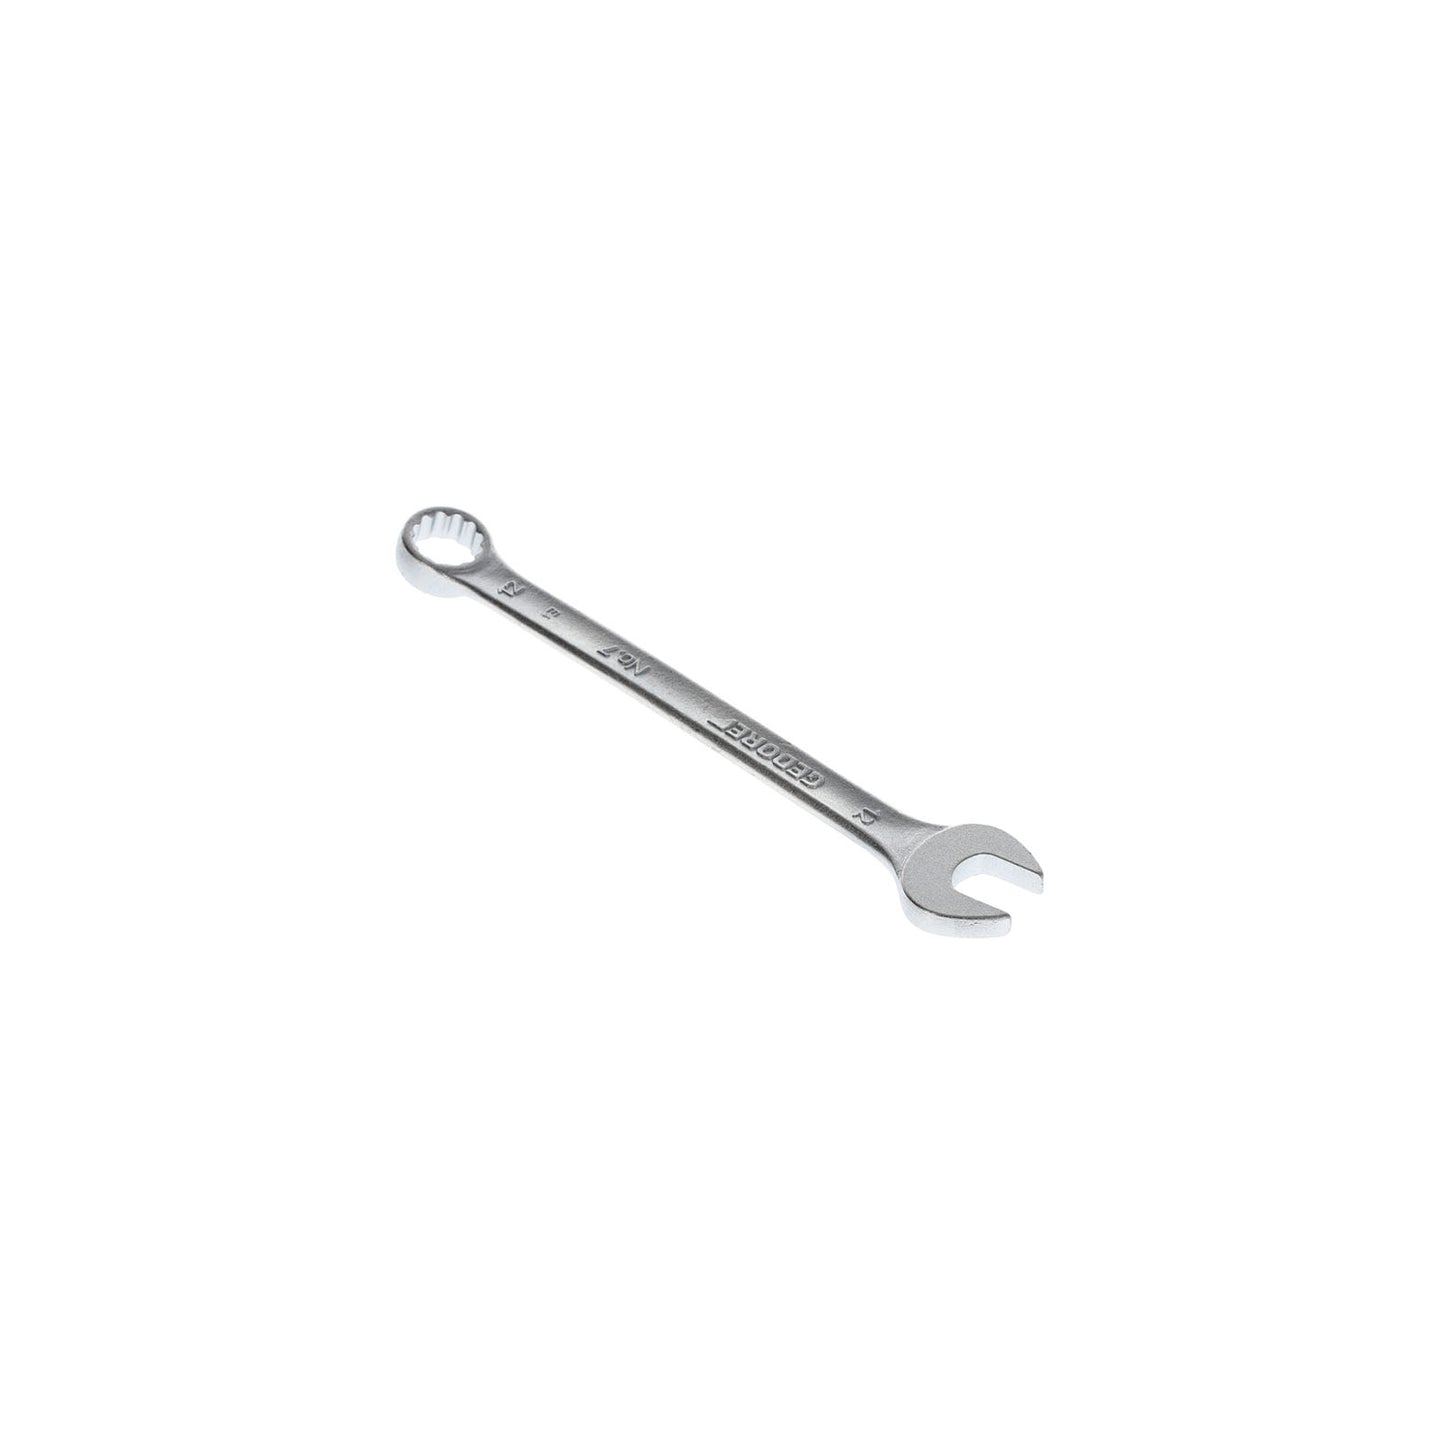 GEDORE 7 12 - Combination Wrench, 12 mm (6090210)